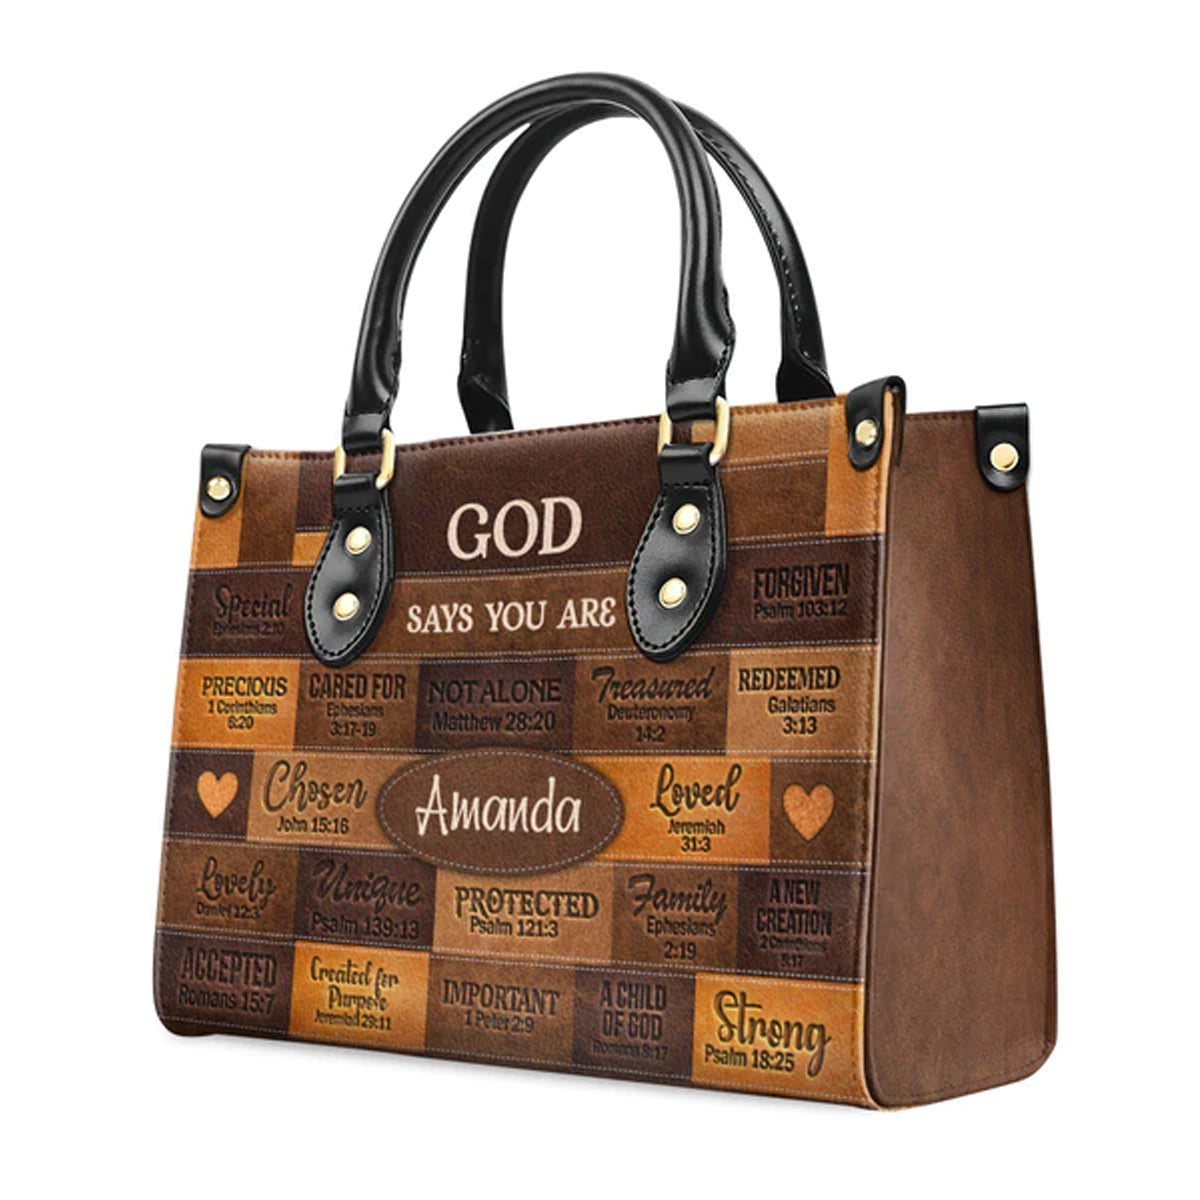 Christianartbag Handbags, God Says You Are Leather Bags, Personalized Bags, Gifts for Women, Christmas Gift, CABLTB01040823. - Christian Art Bag